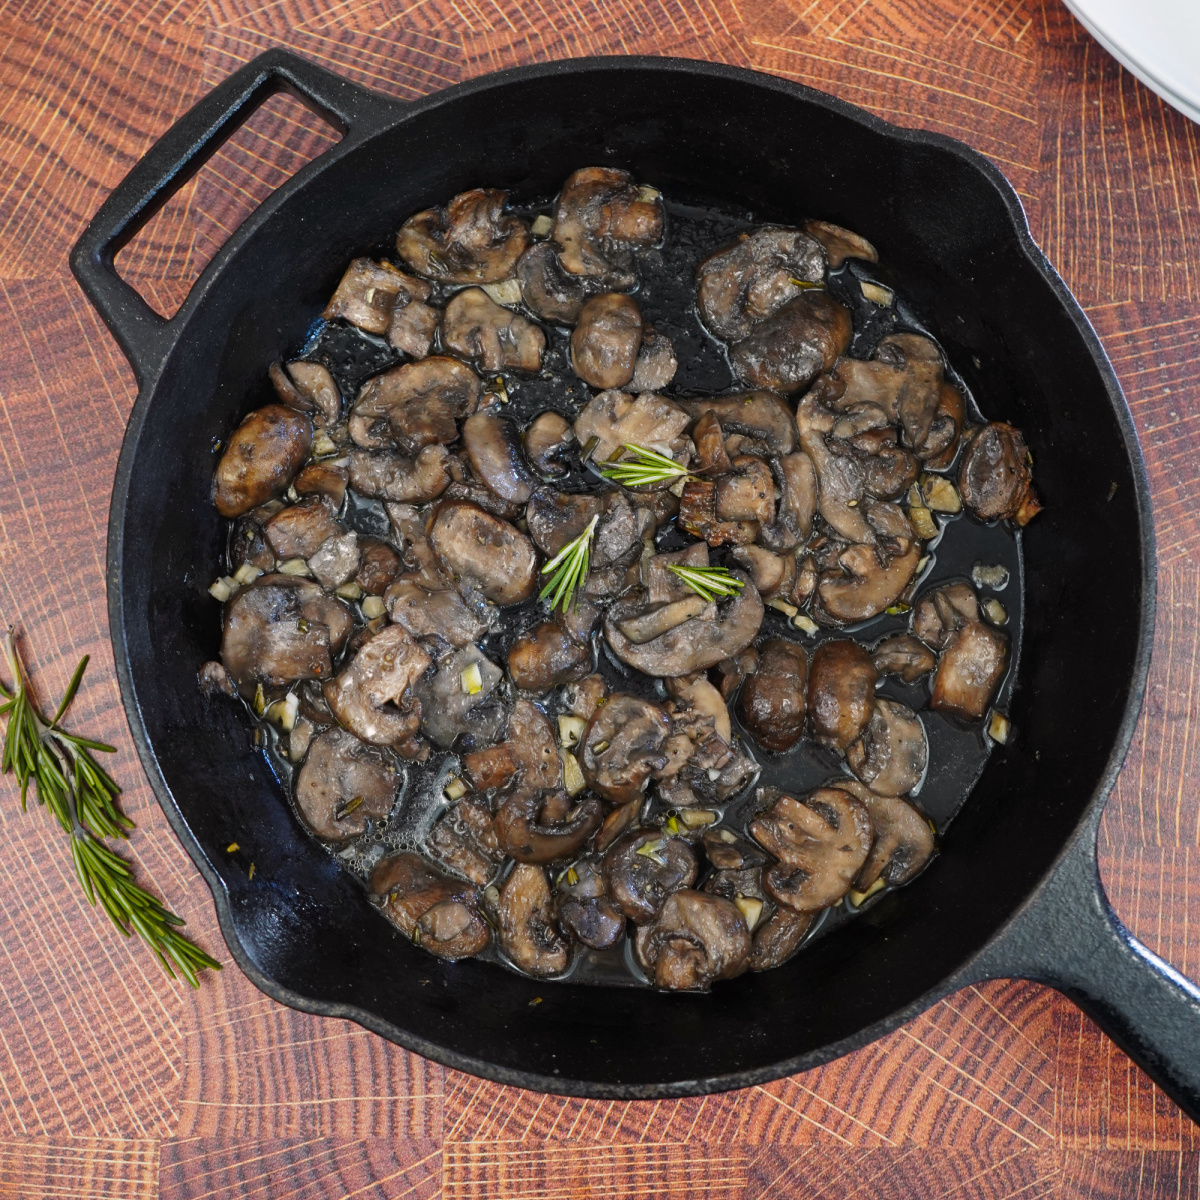 Rosemary smoked mushrooms in a cast iron skillet with fresh rosemary on a wooden board.